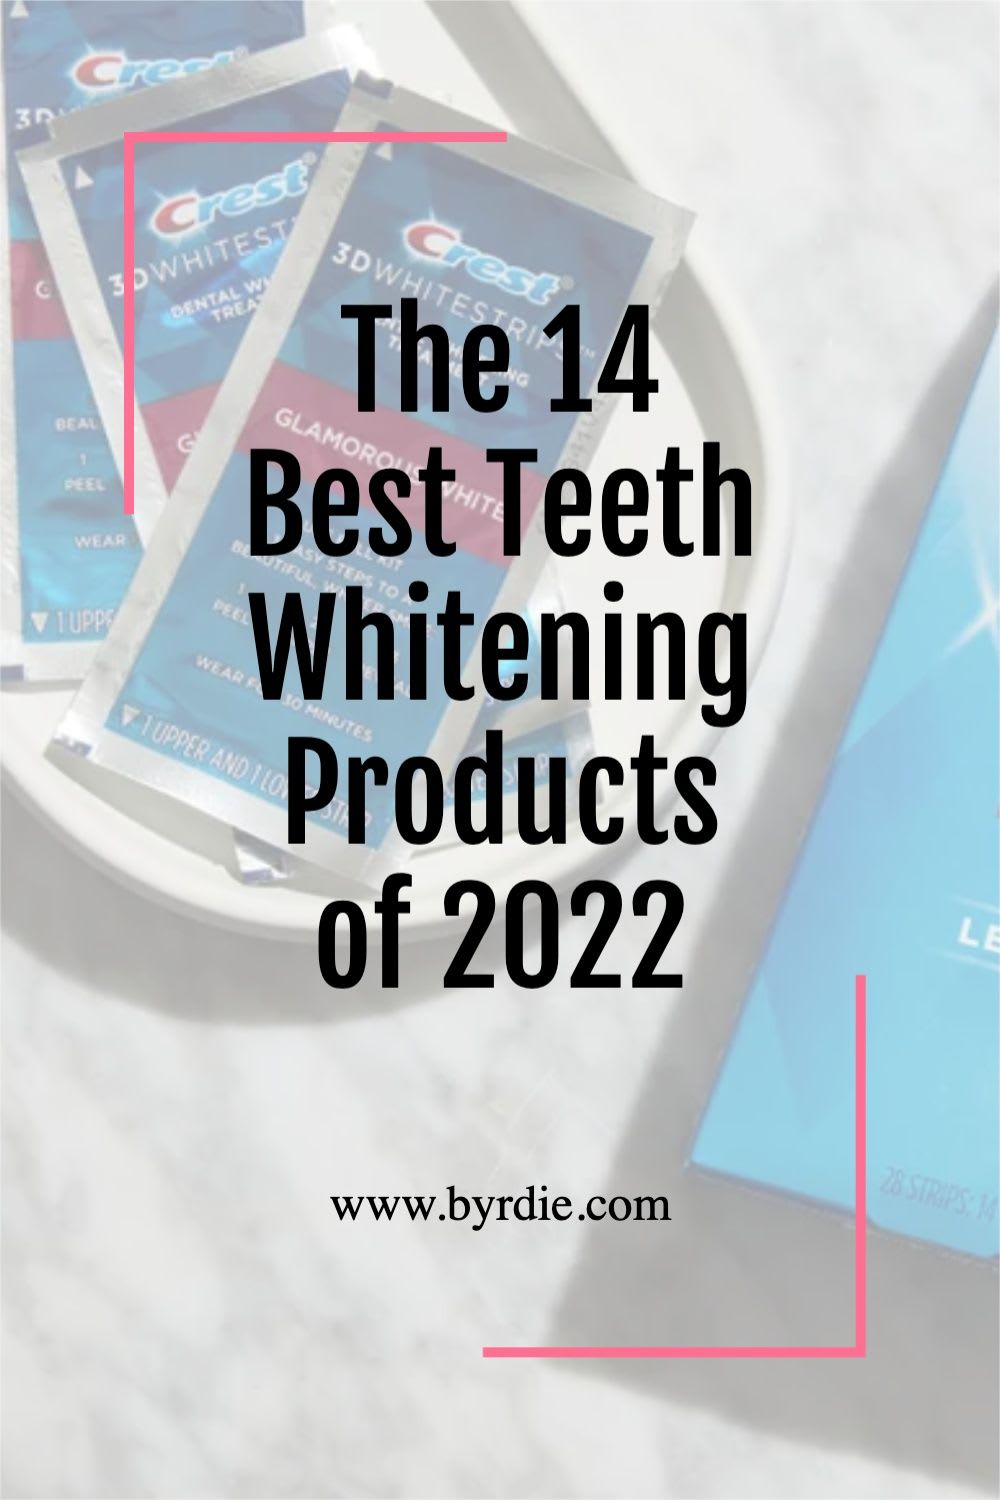 The 14 Best Teeth Whitening Products of 2022